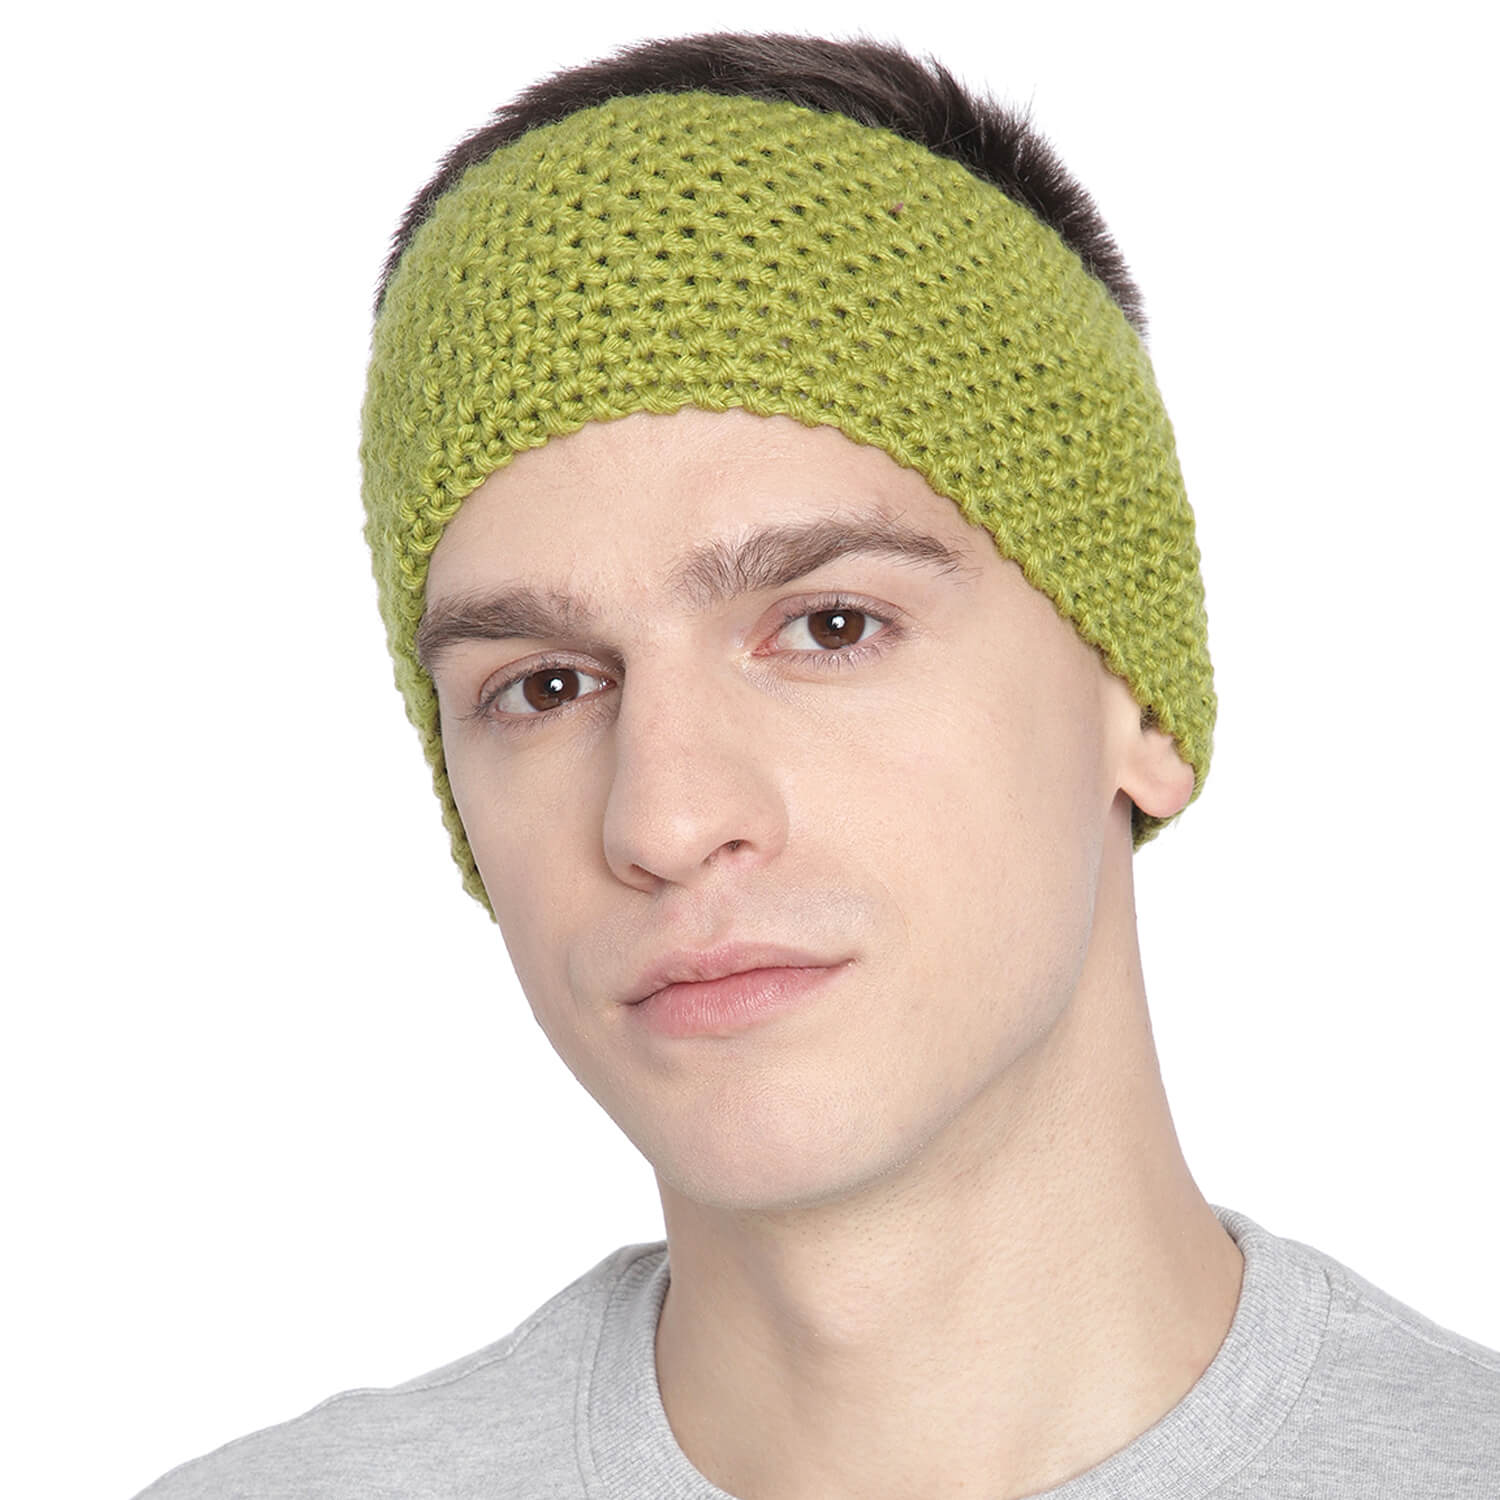 Knitted Headband - Olive Green 303